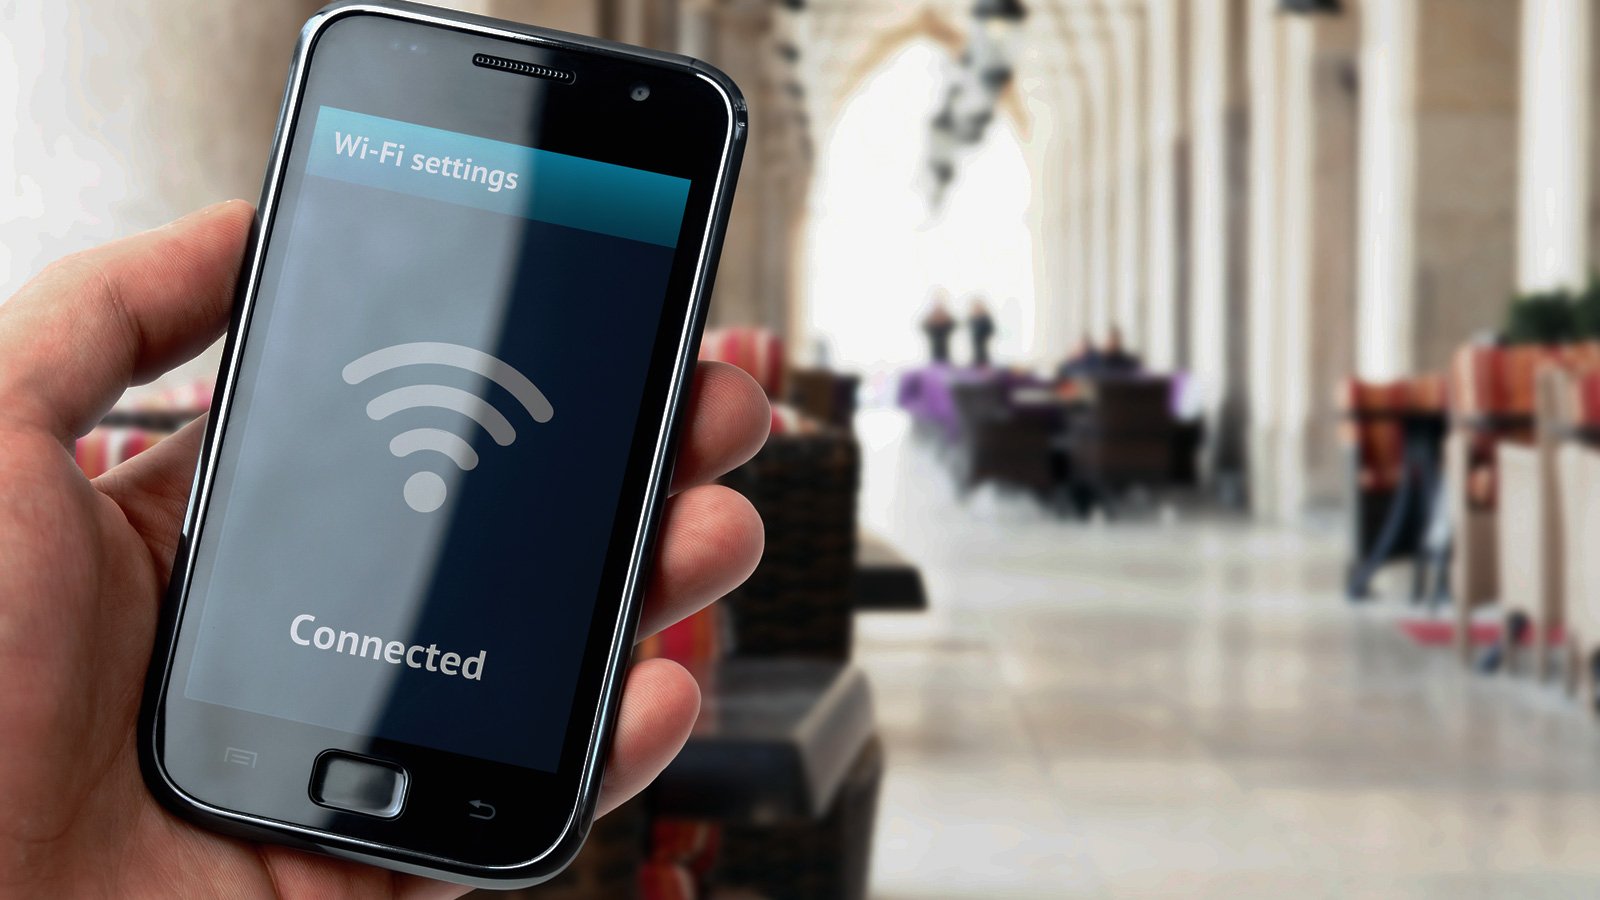 WIFI probing exposes user's personal data